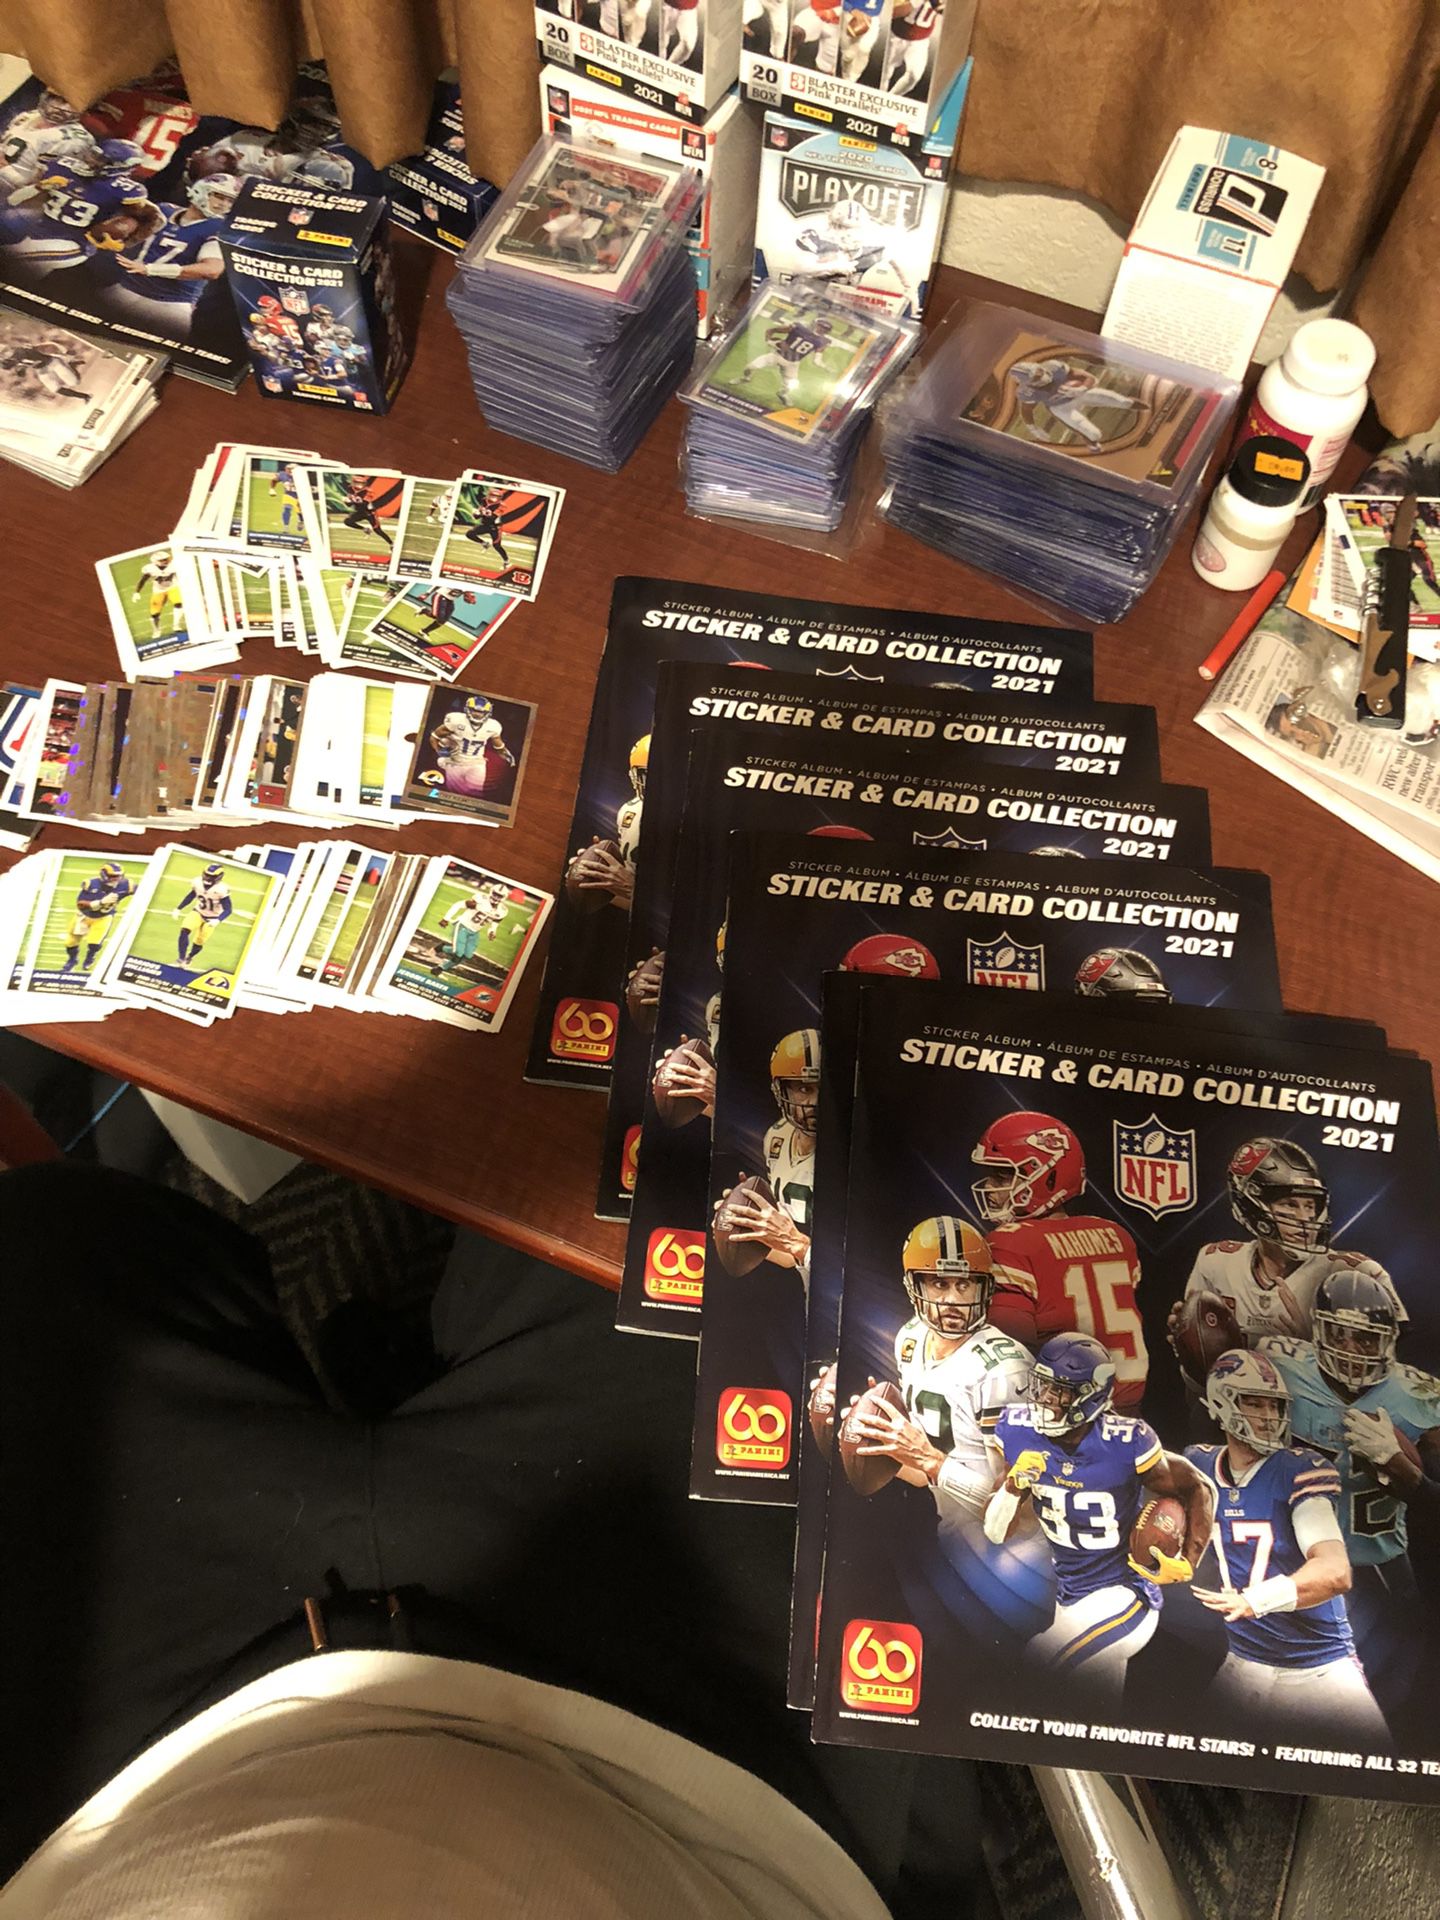 2021 Nfl Sticker & Card Collection Book & Assorted Stickers